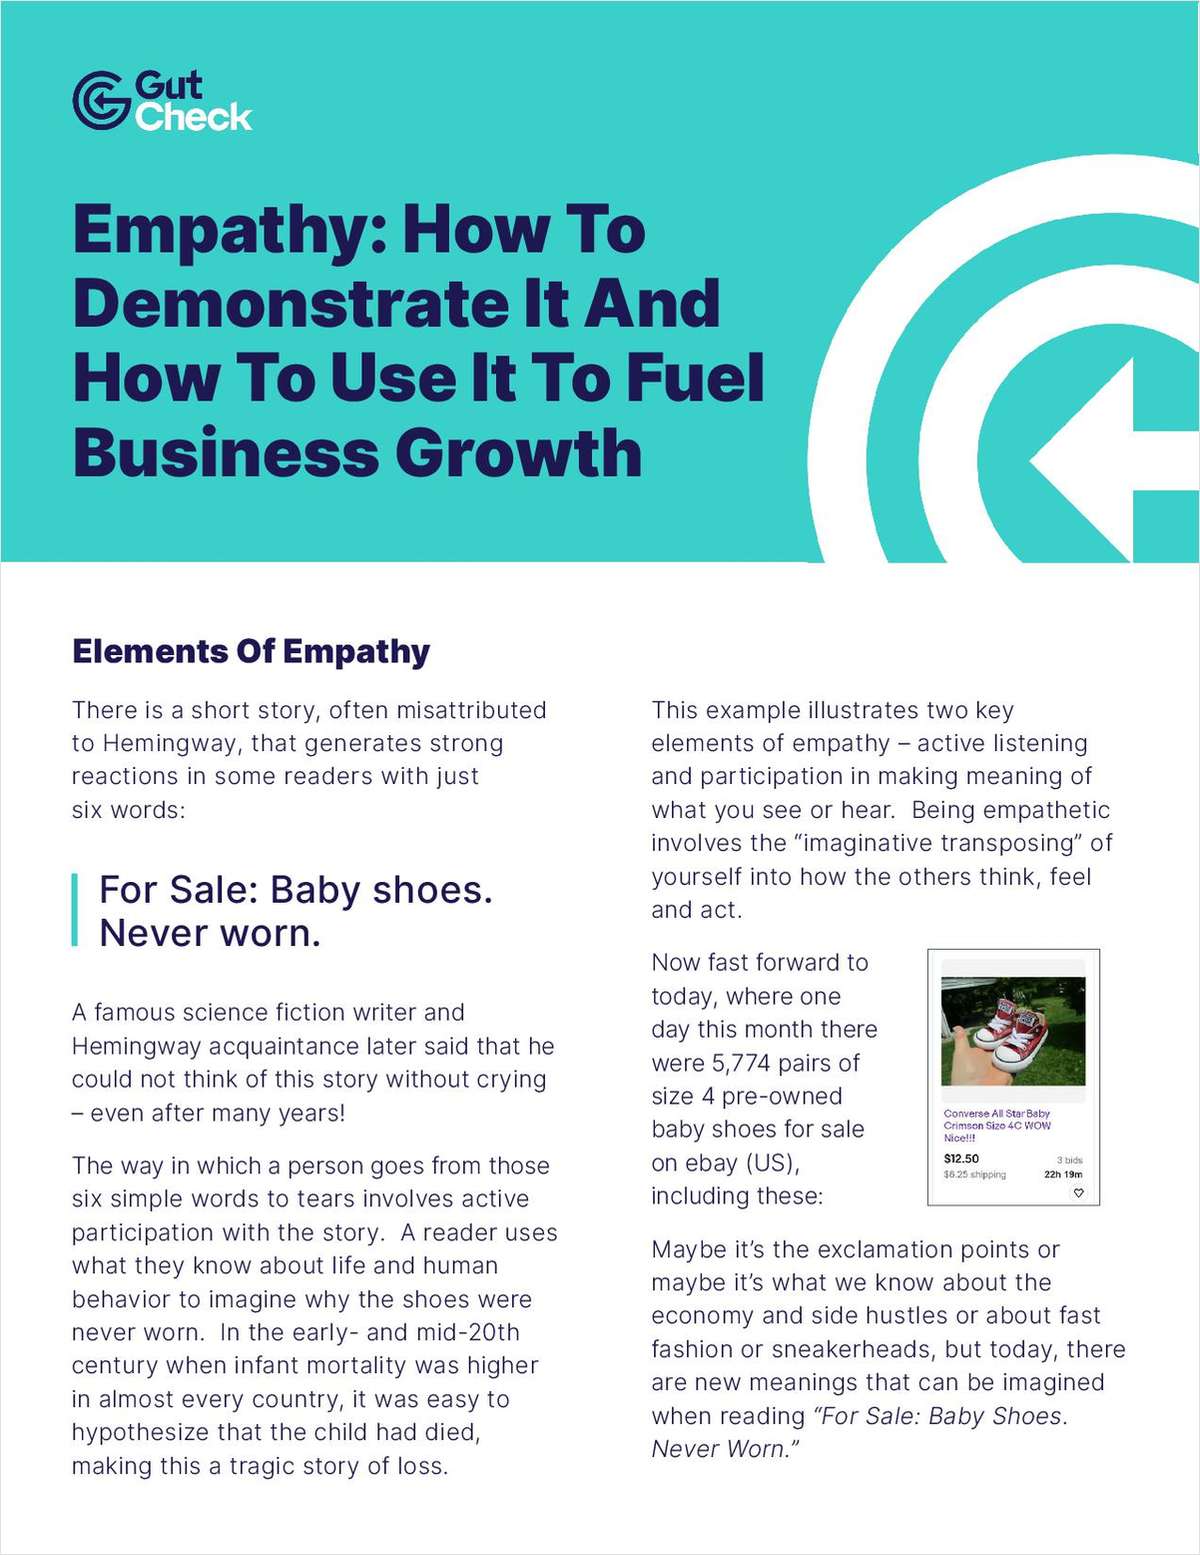 eGuide: Empathy How To Demonstrate & How to Use It to Fuel Business Growth